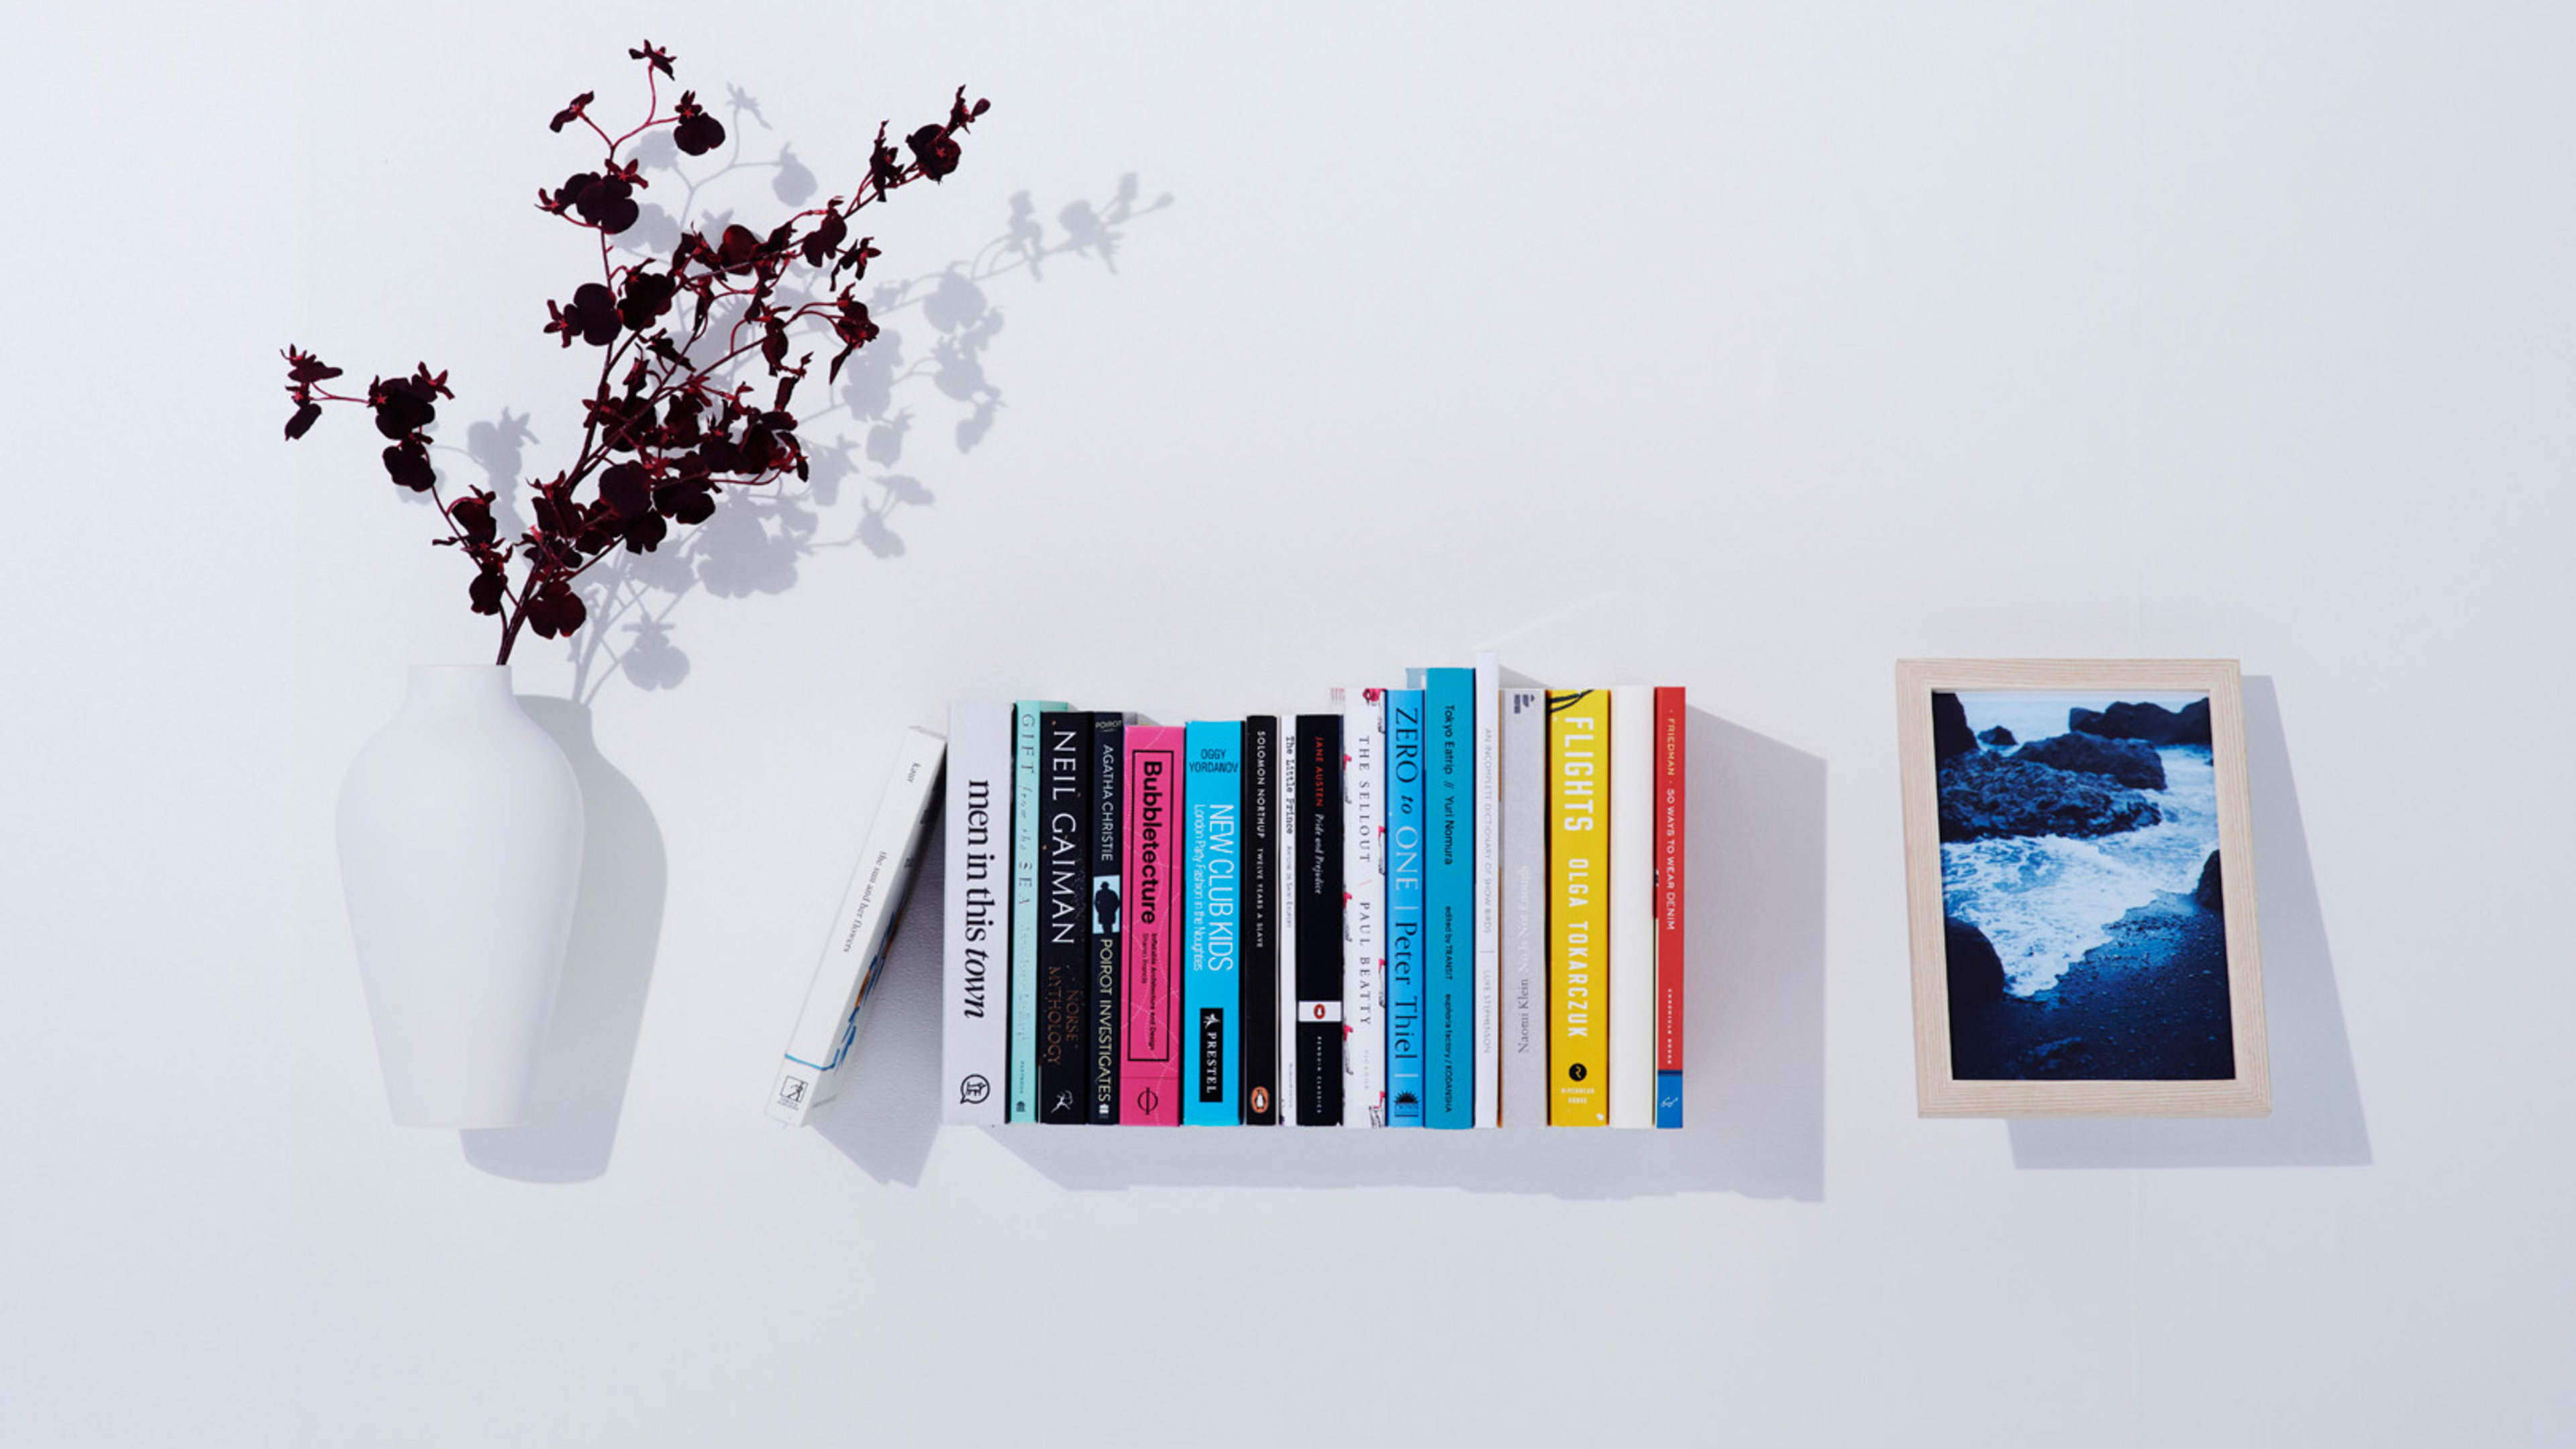 These clever shelves make your books literally float in midair